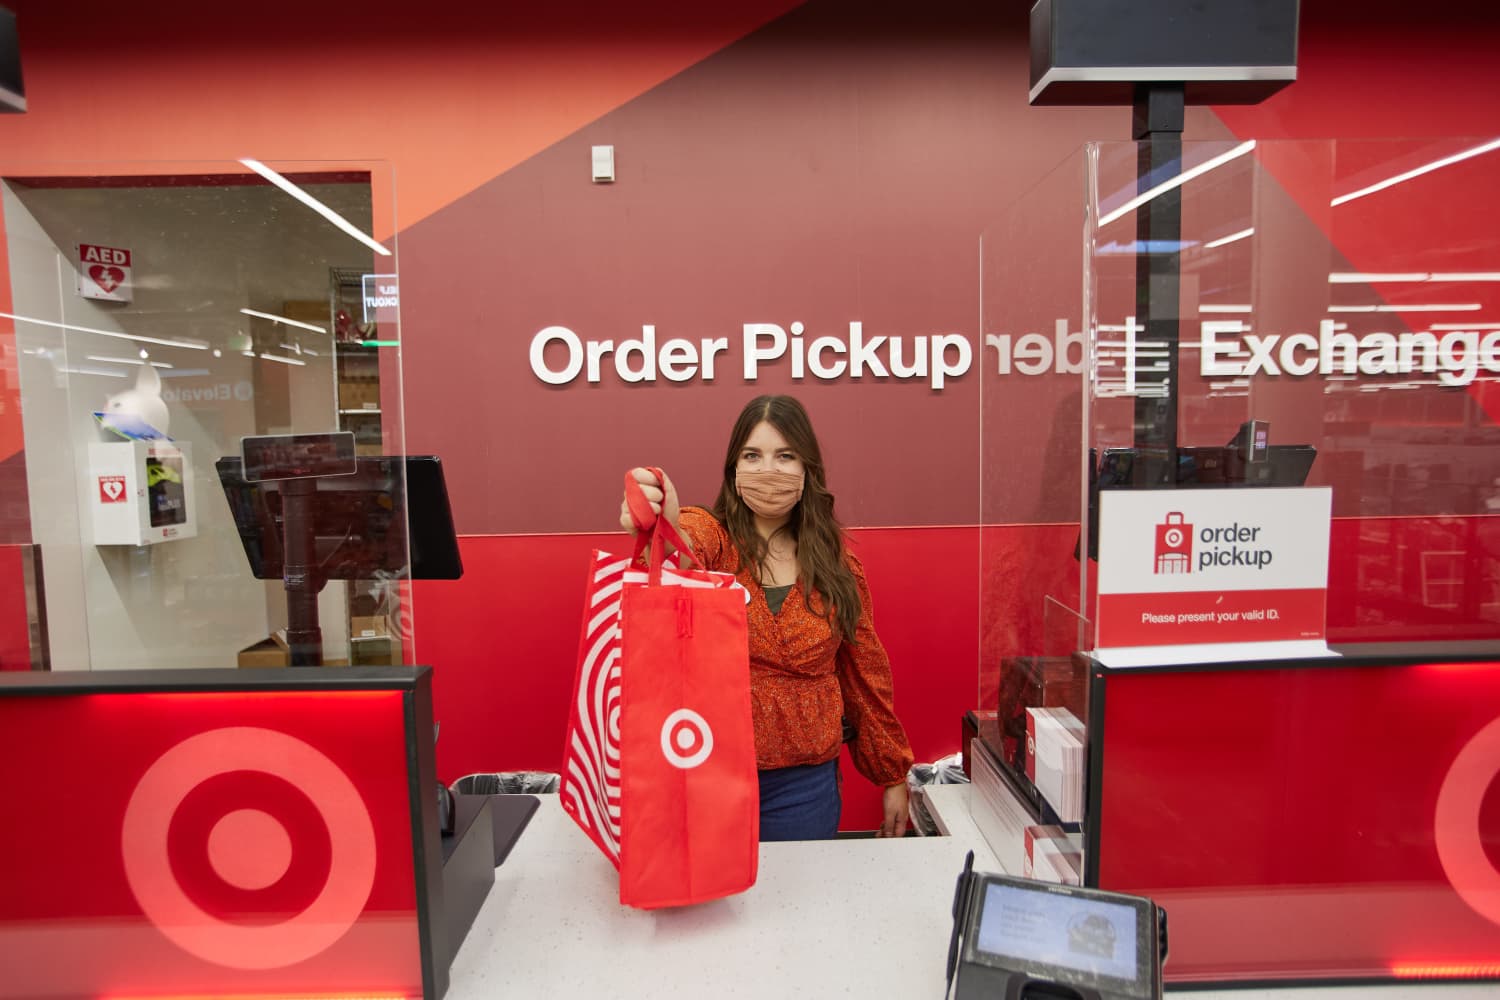 Target offers same-day delivery and pickup of adult beverages